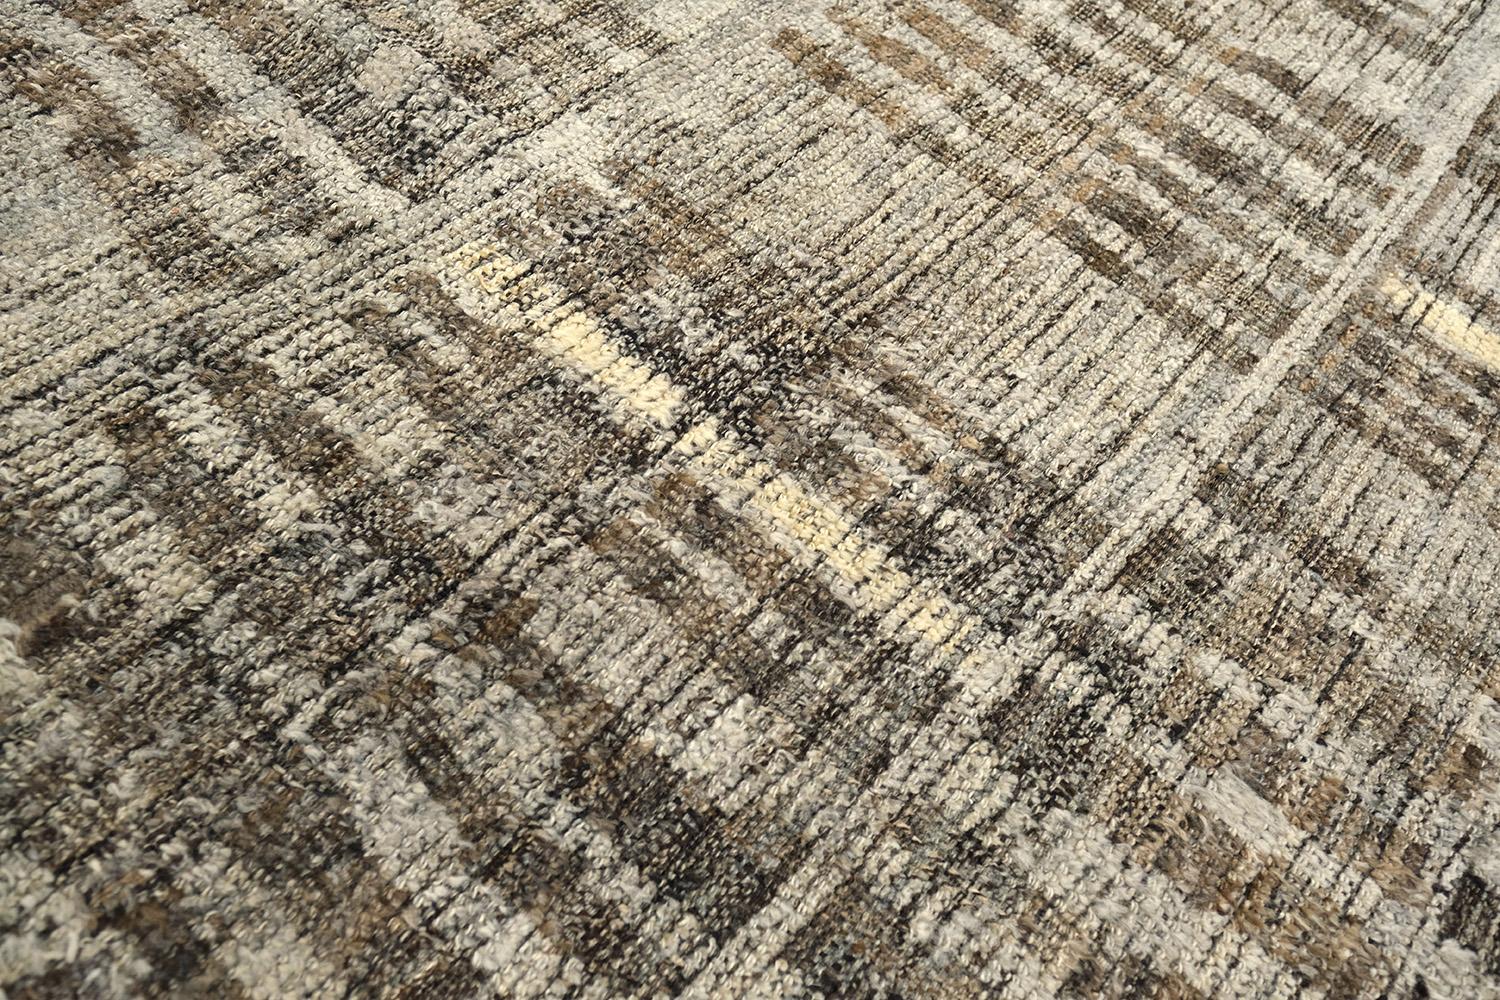 Bacatta uses linework and color to create definition and movement into handwoven wool. Line detailing in neutral tones fascinatingly moves across the rug. Detailed natural pile weave runs around the border with tassels adding an exquisite decorative